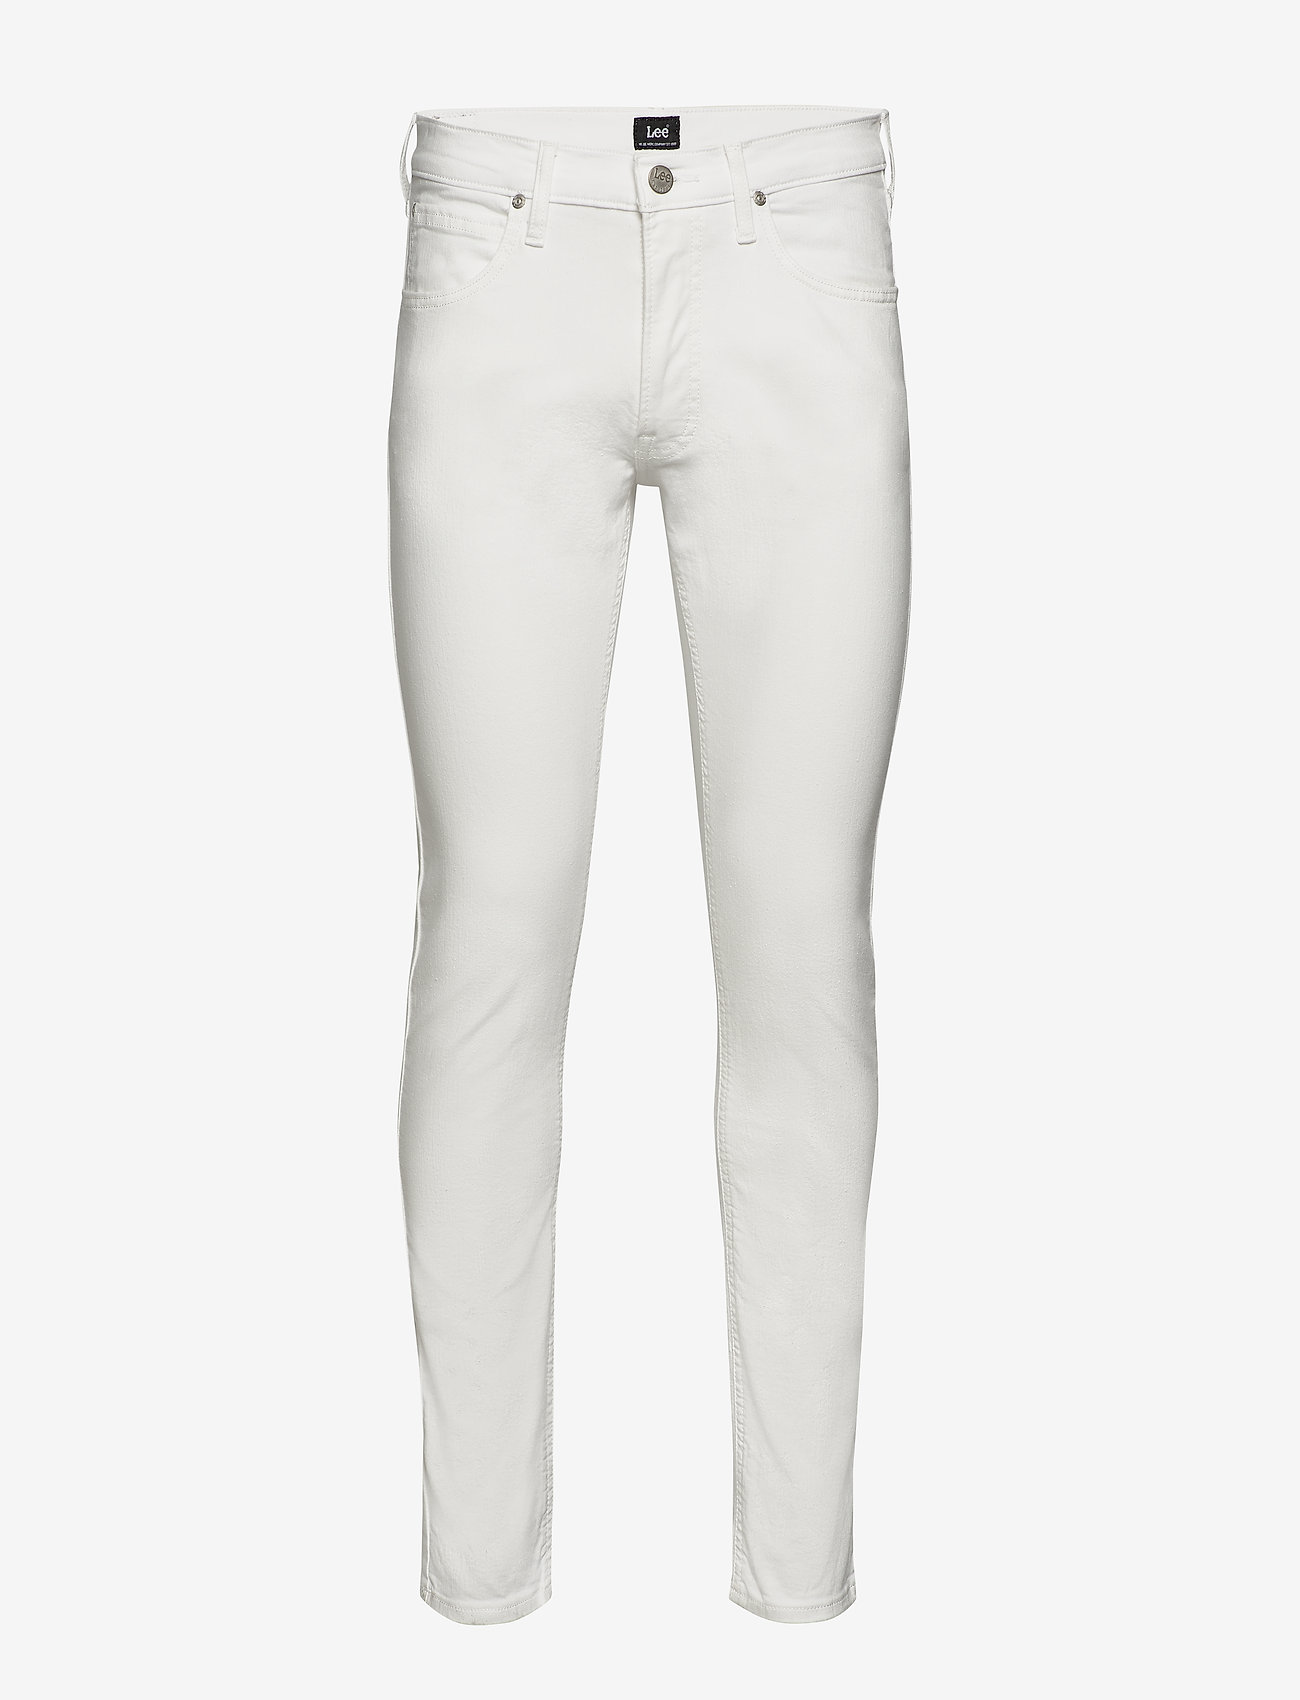 lee jeans white